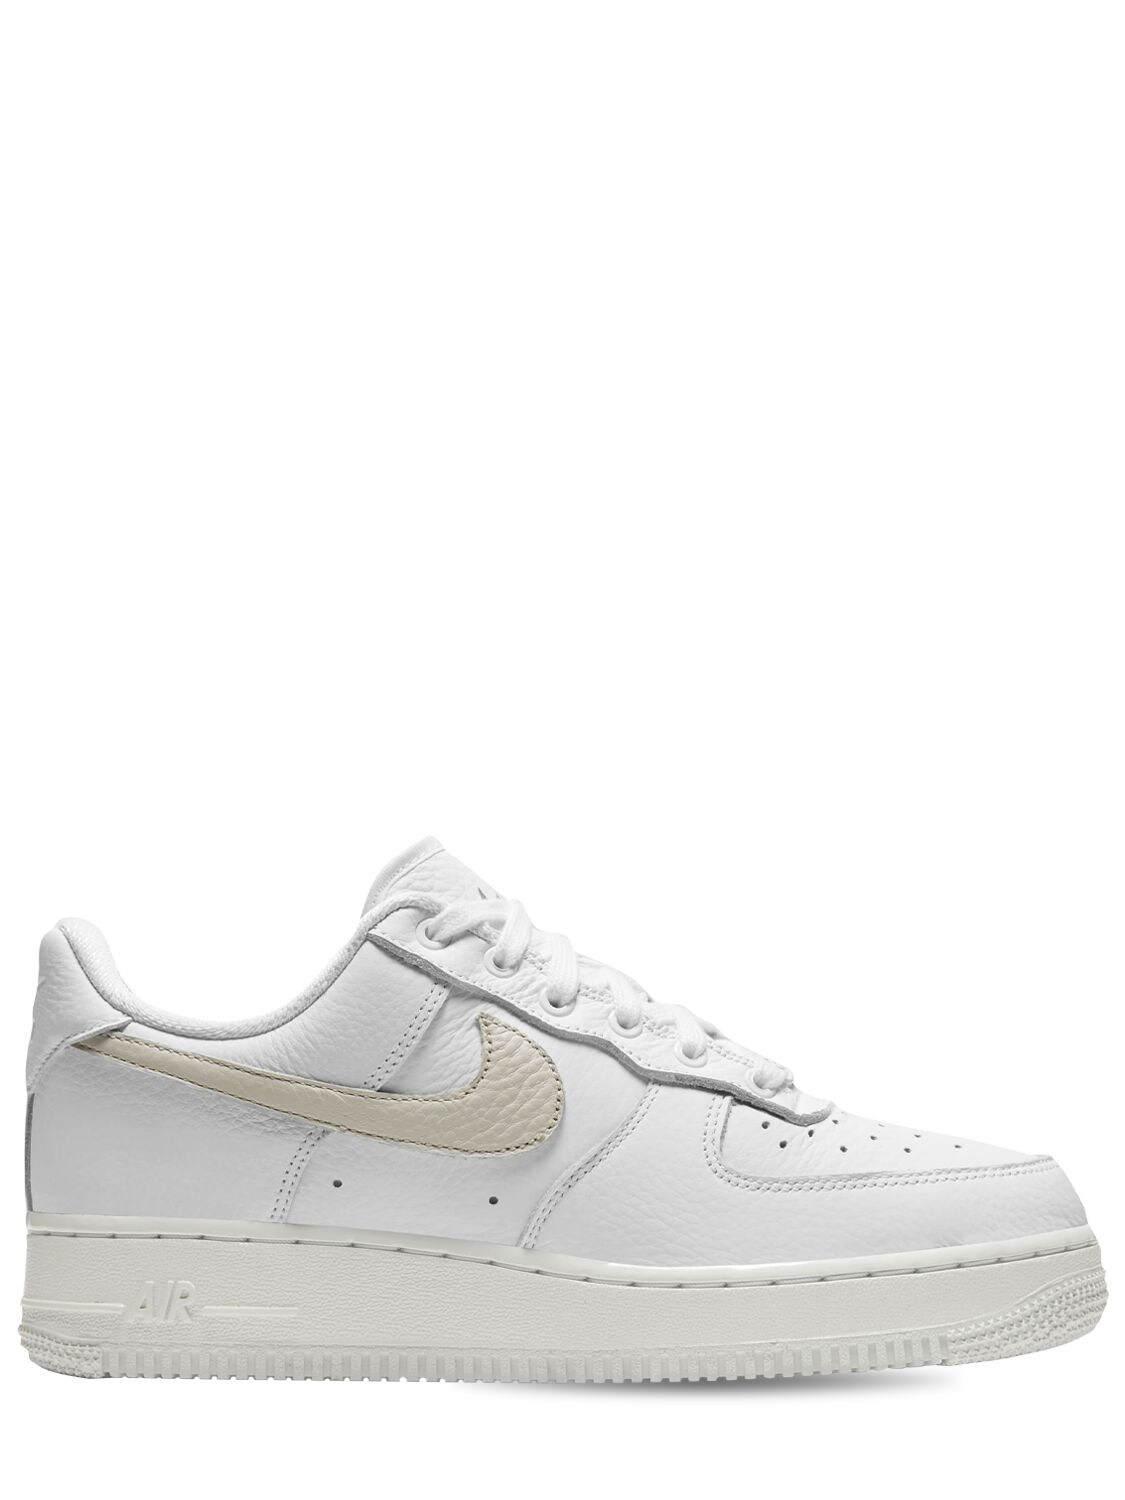 cheapest place to buy air force 1